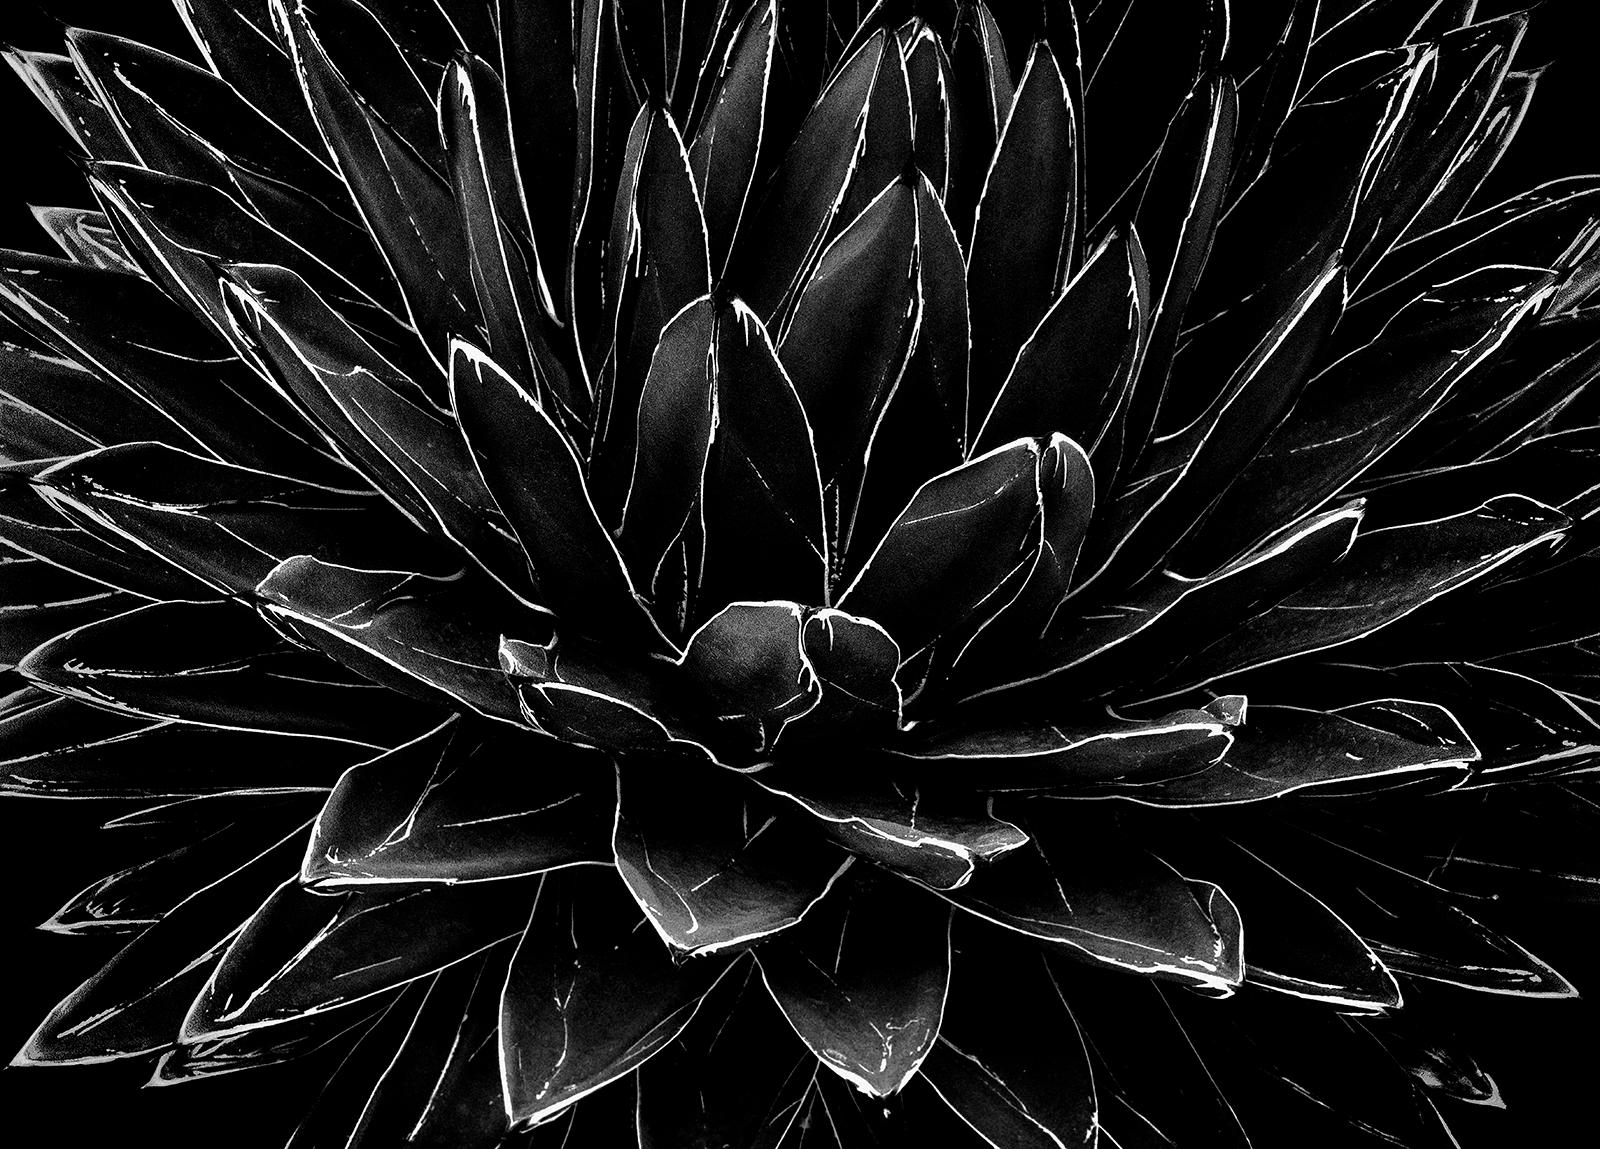 Ian Sanderson Black and White Photograph - Cactus-Signed limited edition still life print, Black white nature, Contemporary